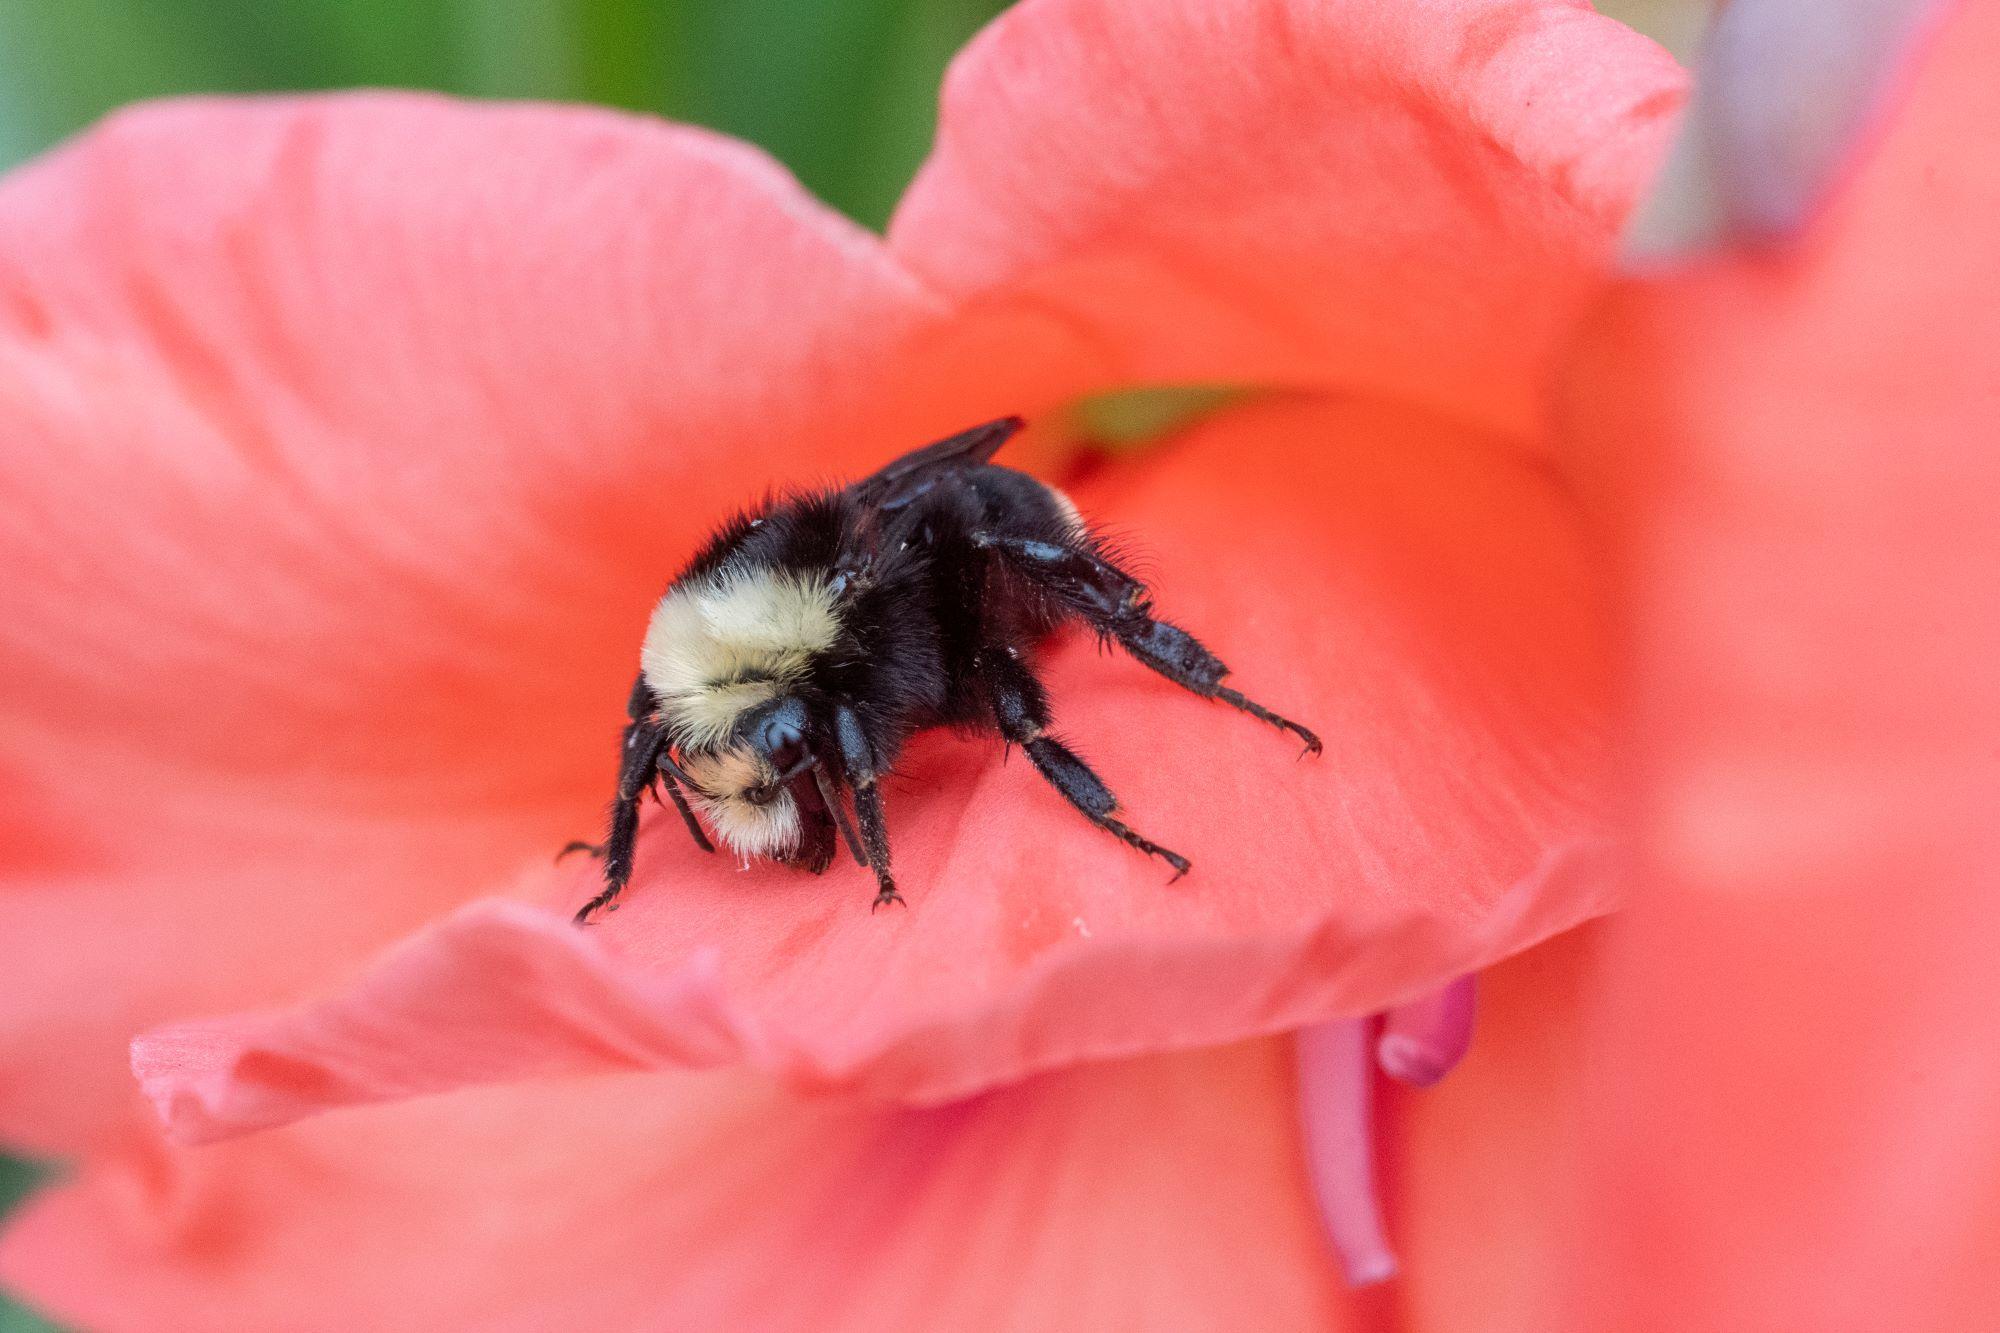 A bumble bee on a pink flower.